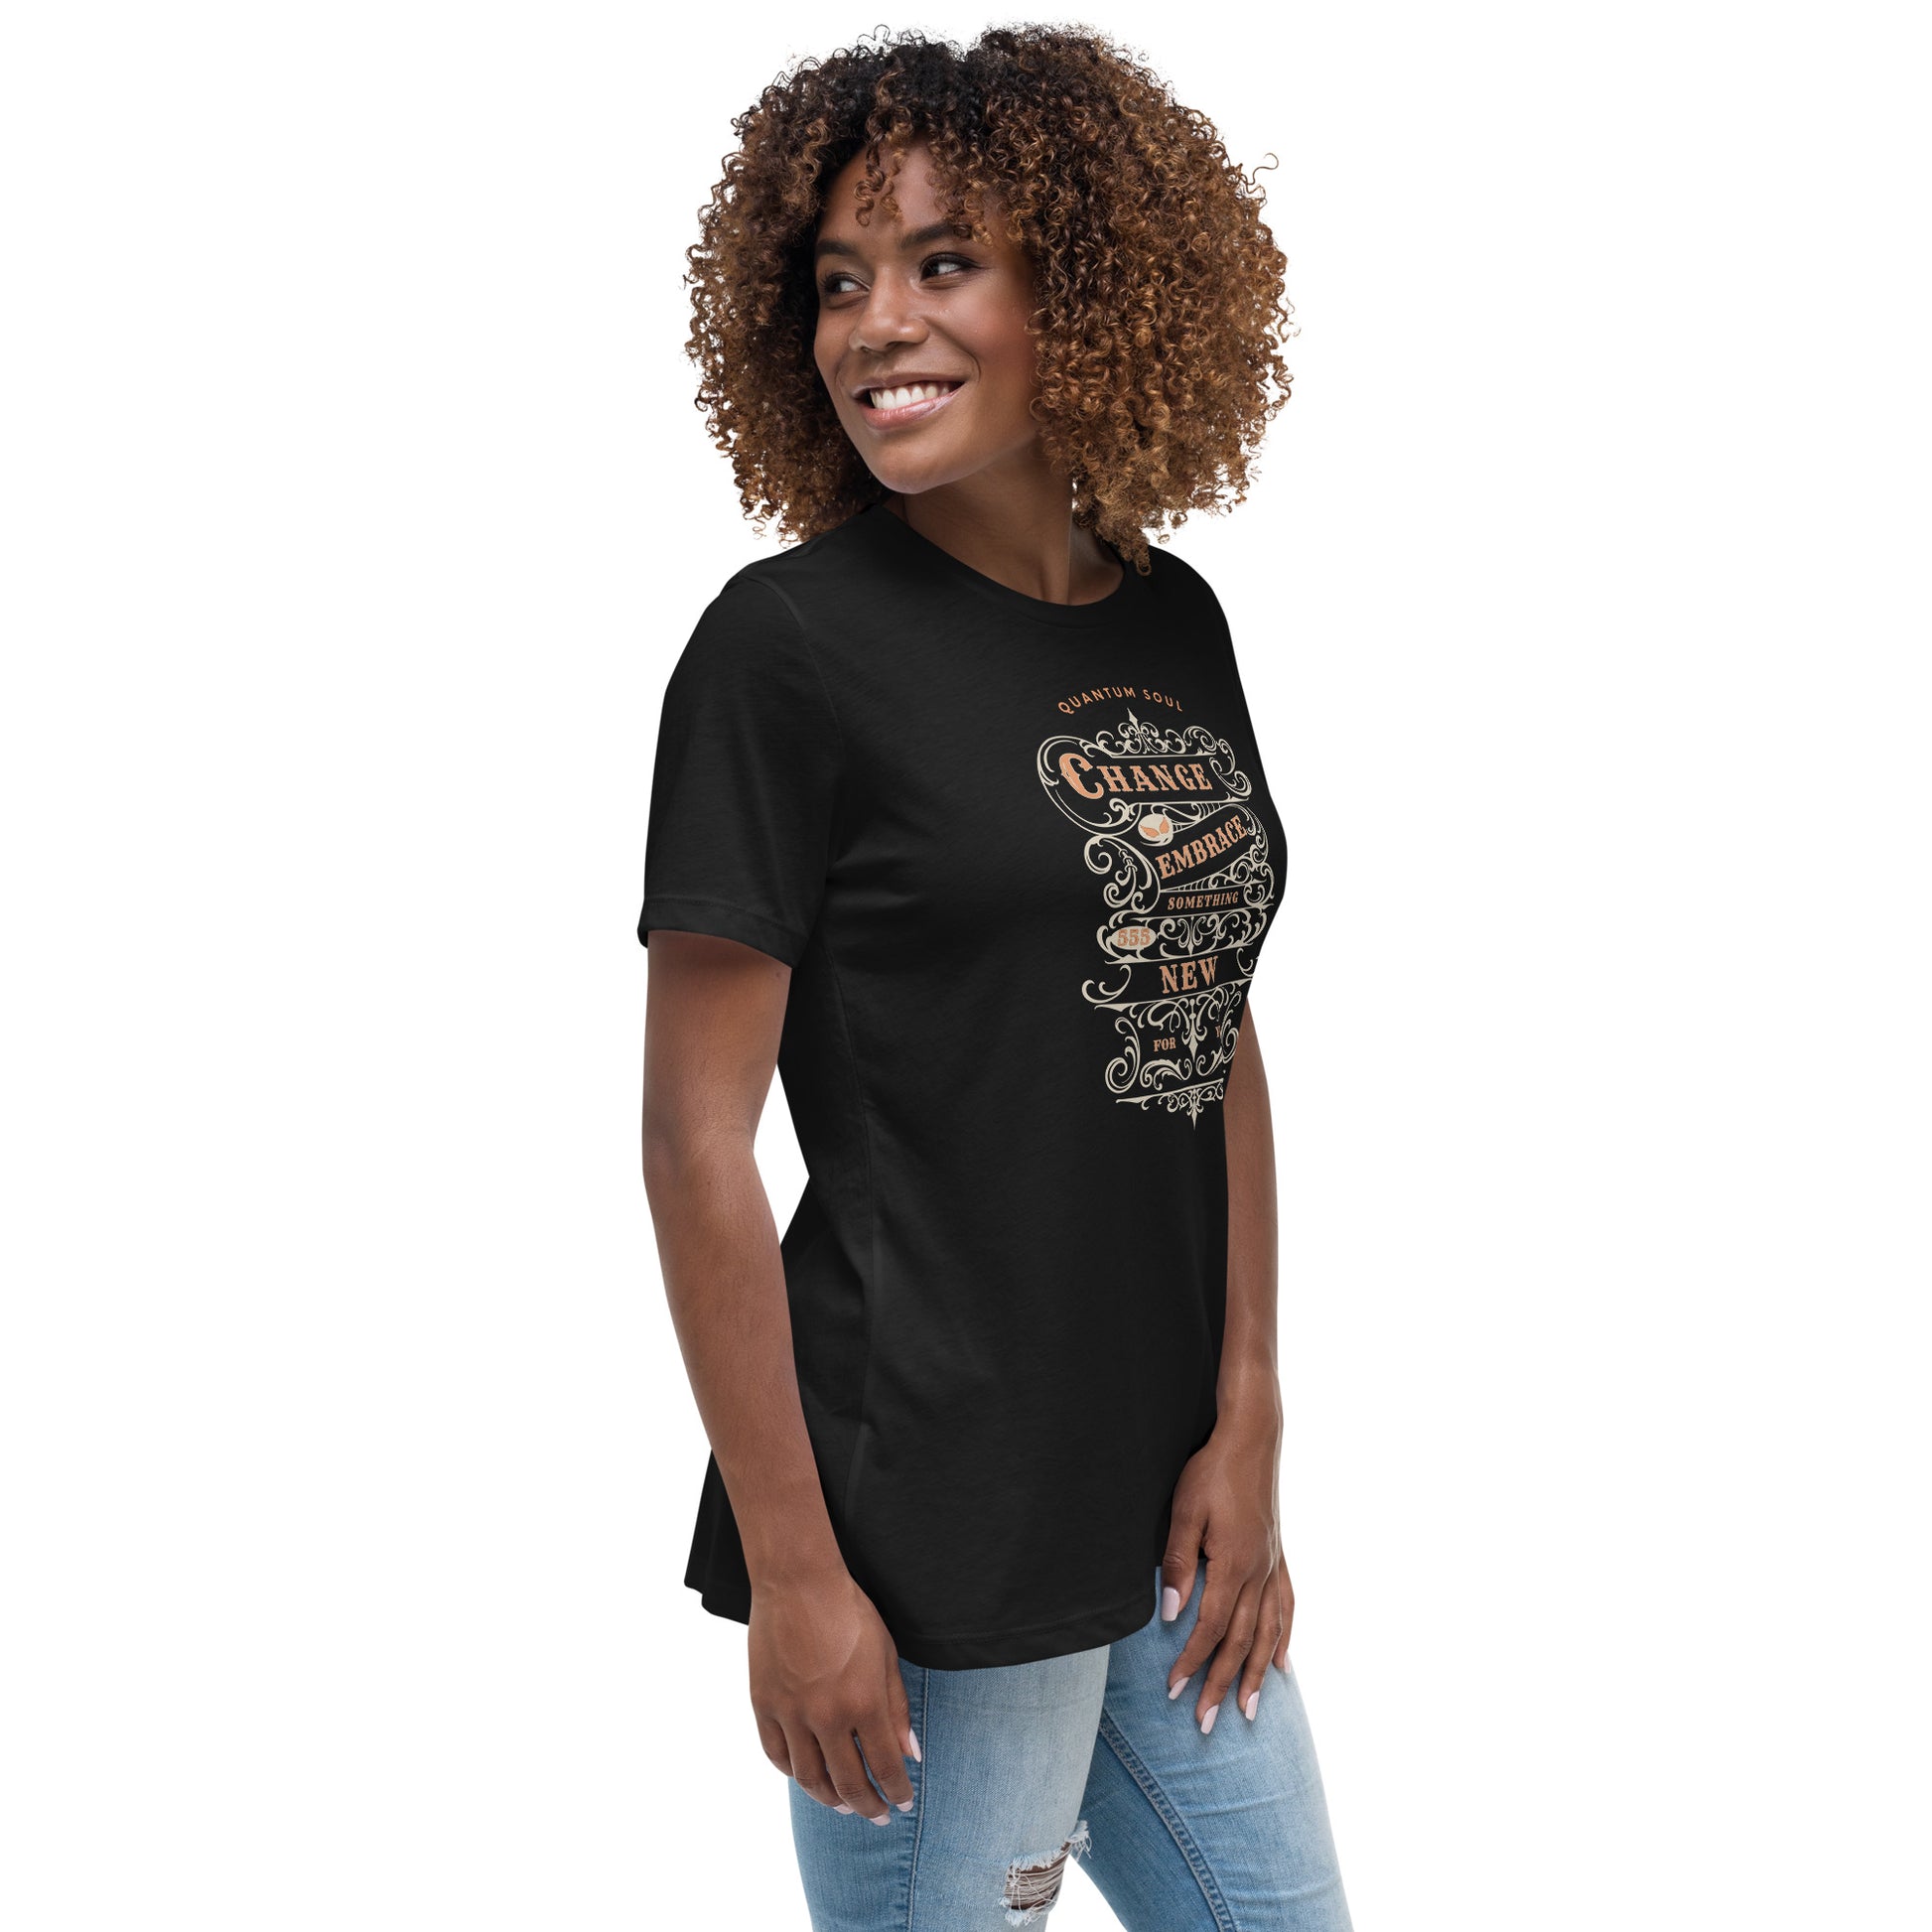 Change 555 womens-relaxed-t-shirt-black-right-front